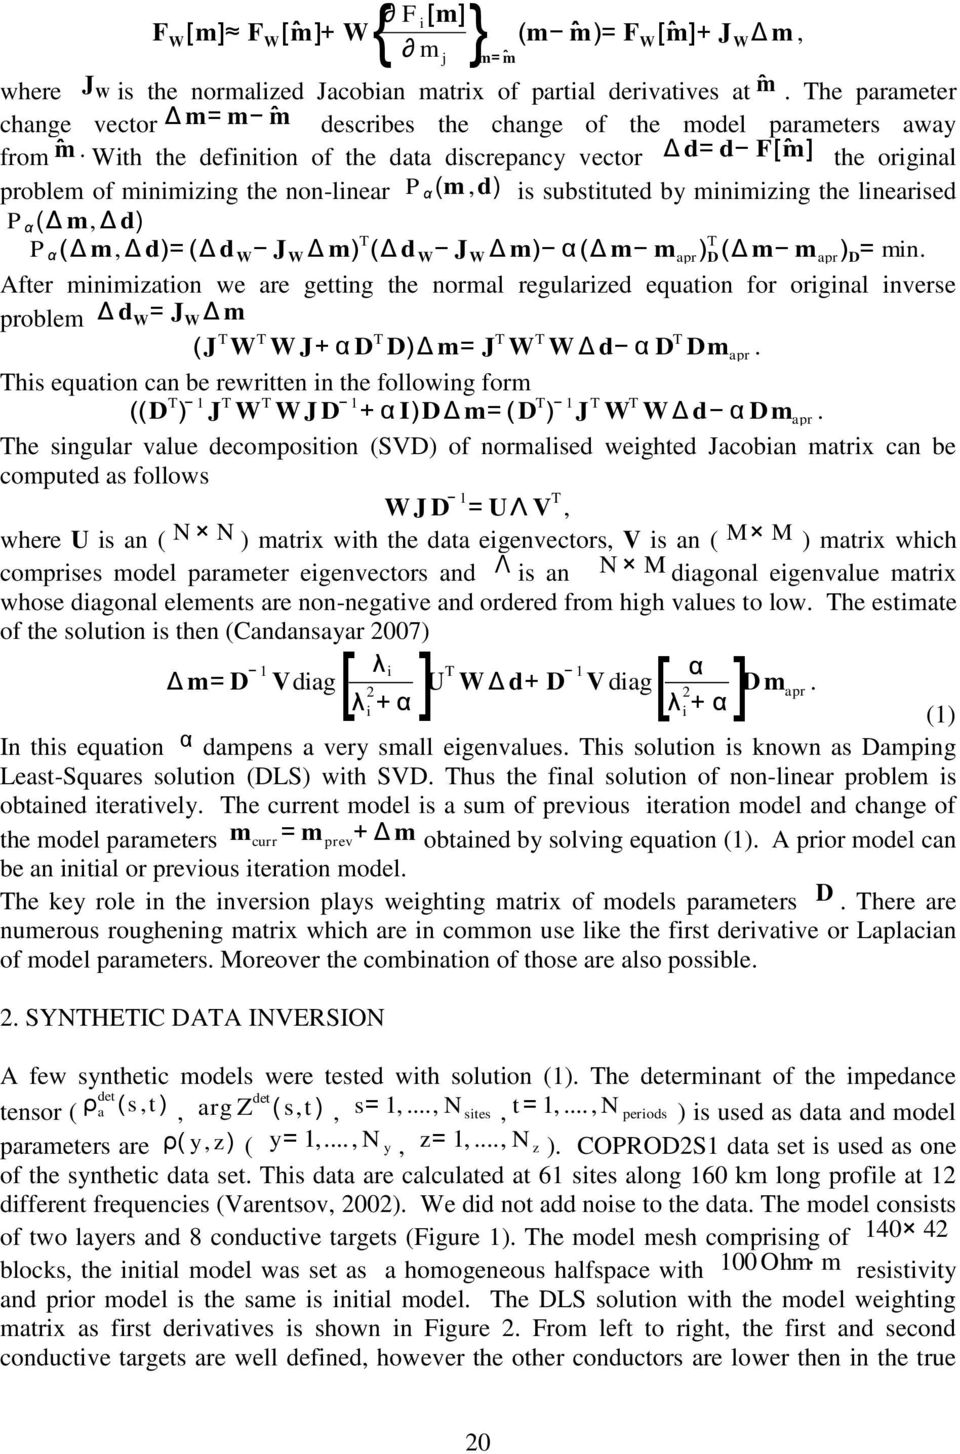 With the definition of the data discrepancy vector Δd= d F[ m] the original problem of minimizing the non-linear P α (m,d) is substituted by minimizing the linearised P α (Δ m, Δ d) P α (Δ m, Δ d)=